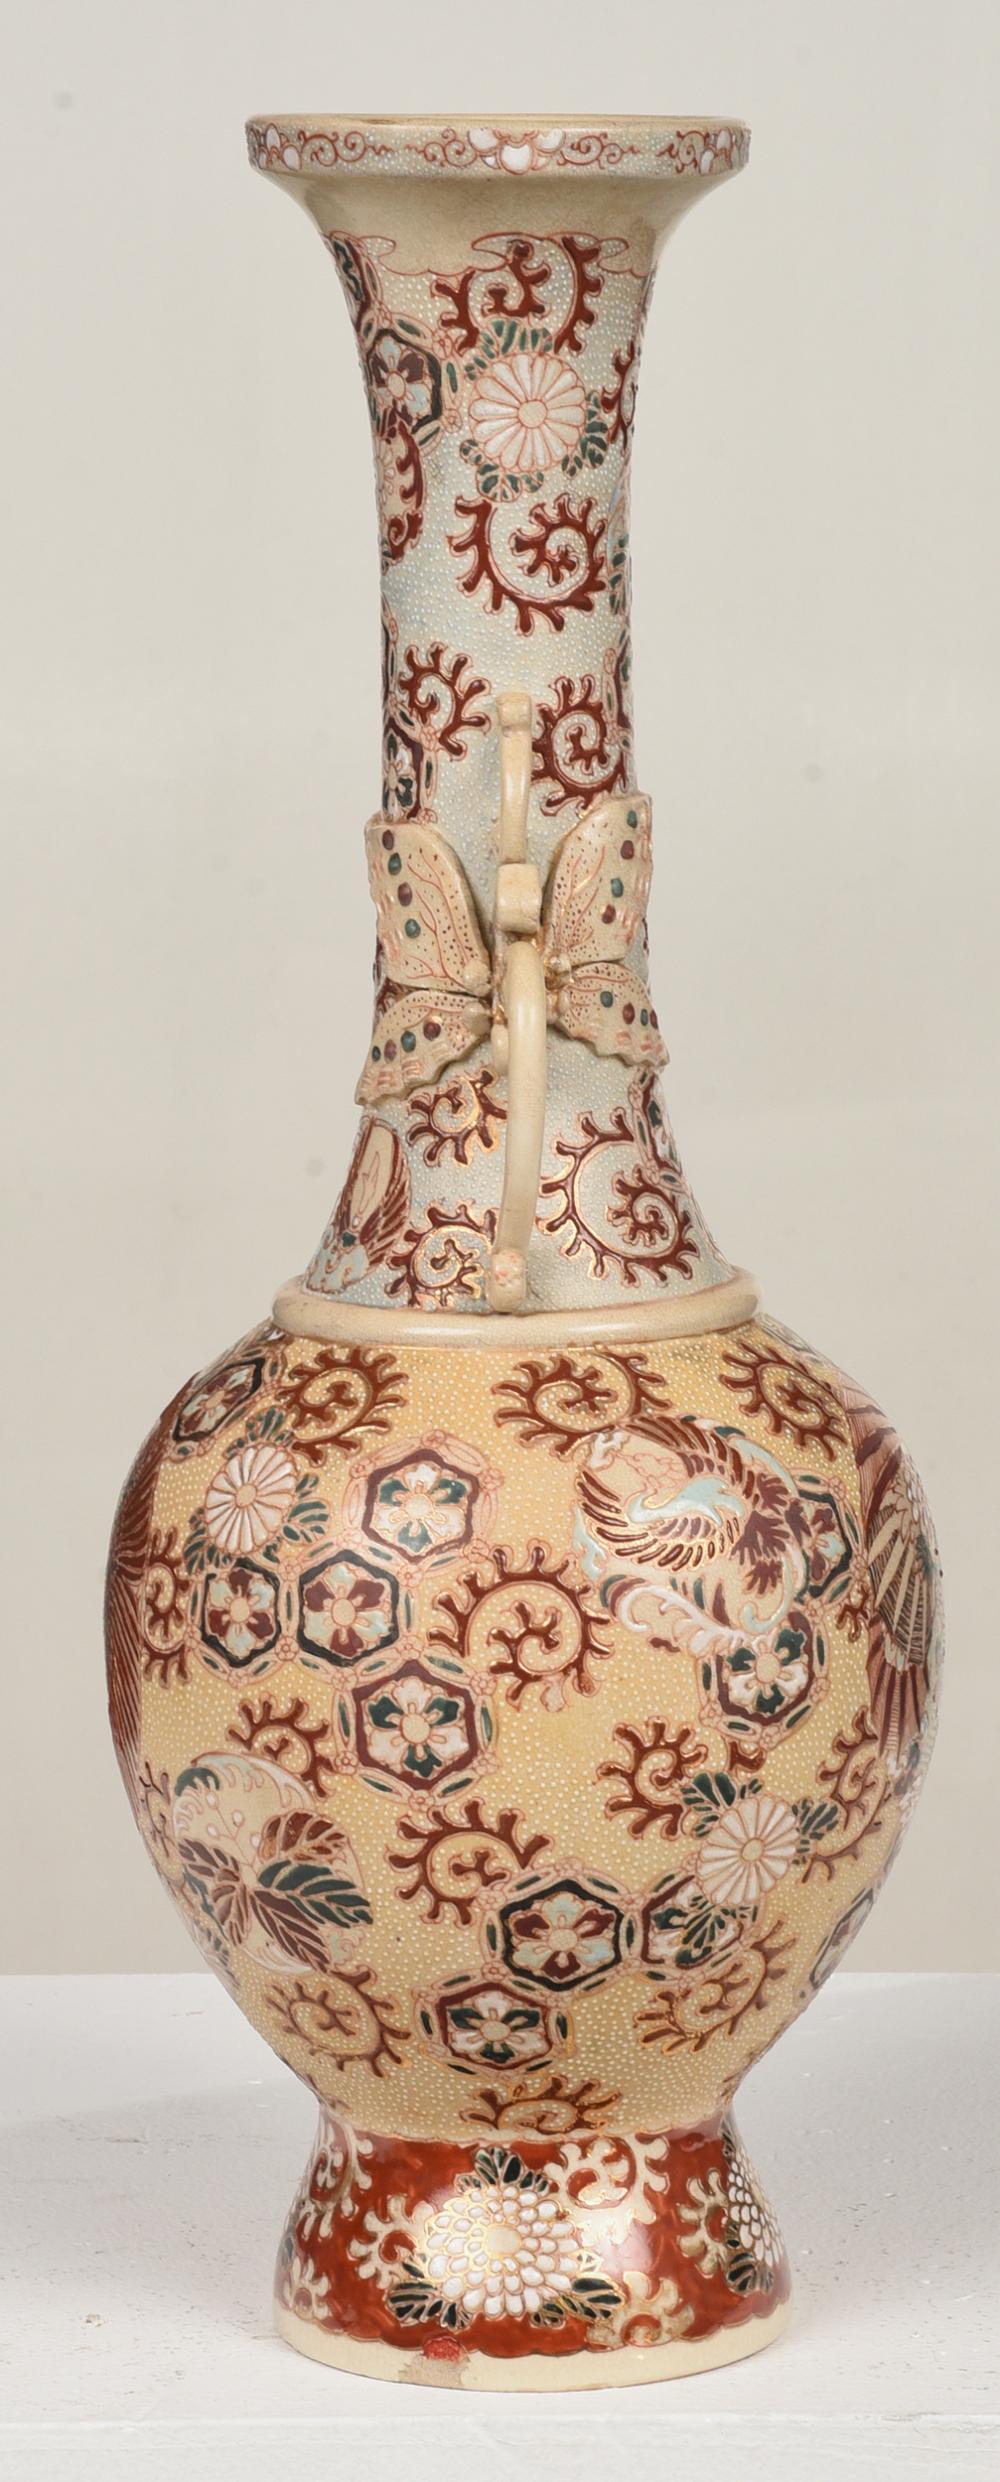 Meiji period, bottle form with tall flared neck and scrolls handles, polychrome moriage enamel and gilt decoration, decorated with dragon and phoenix on each side, with chrysanthemums, scrolls, and floral roundels throughout.

A small professional